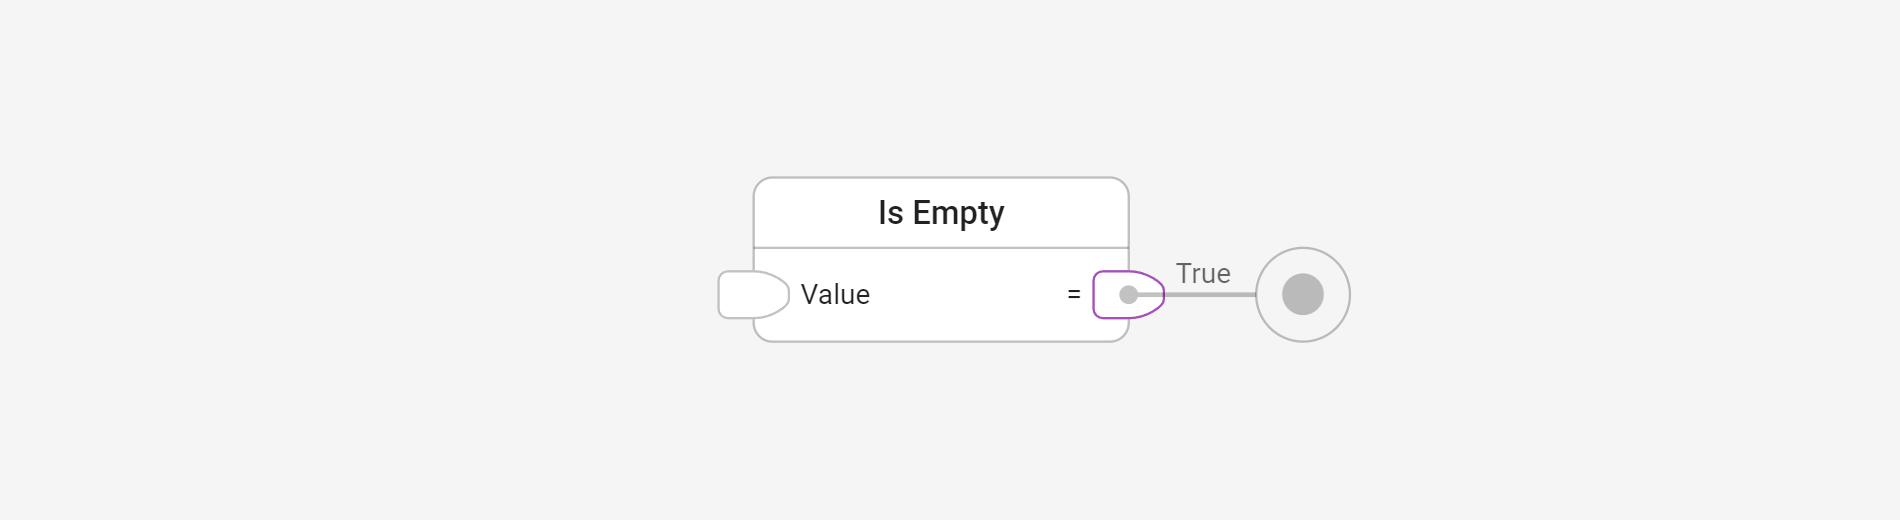 Check if a value is empty